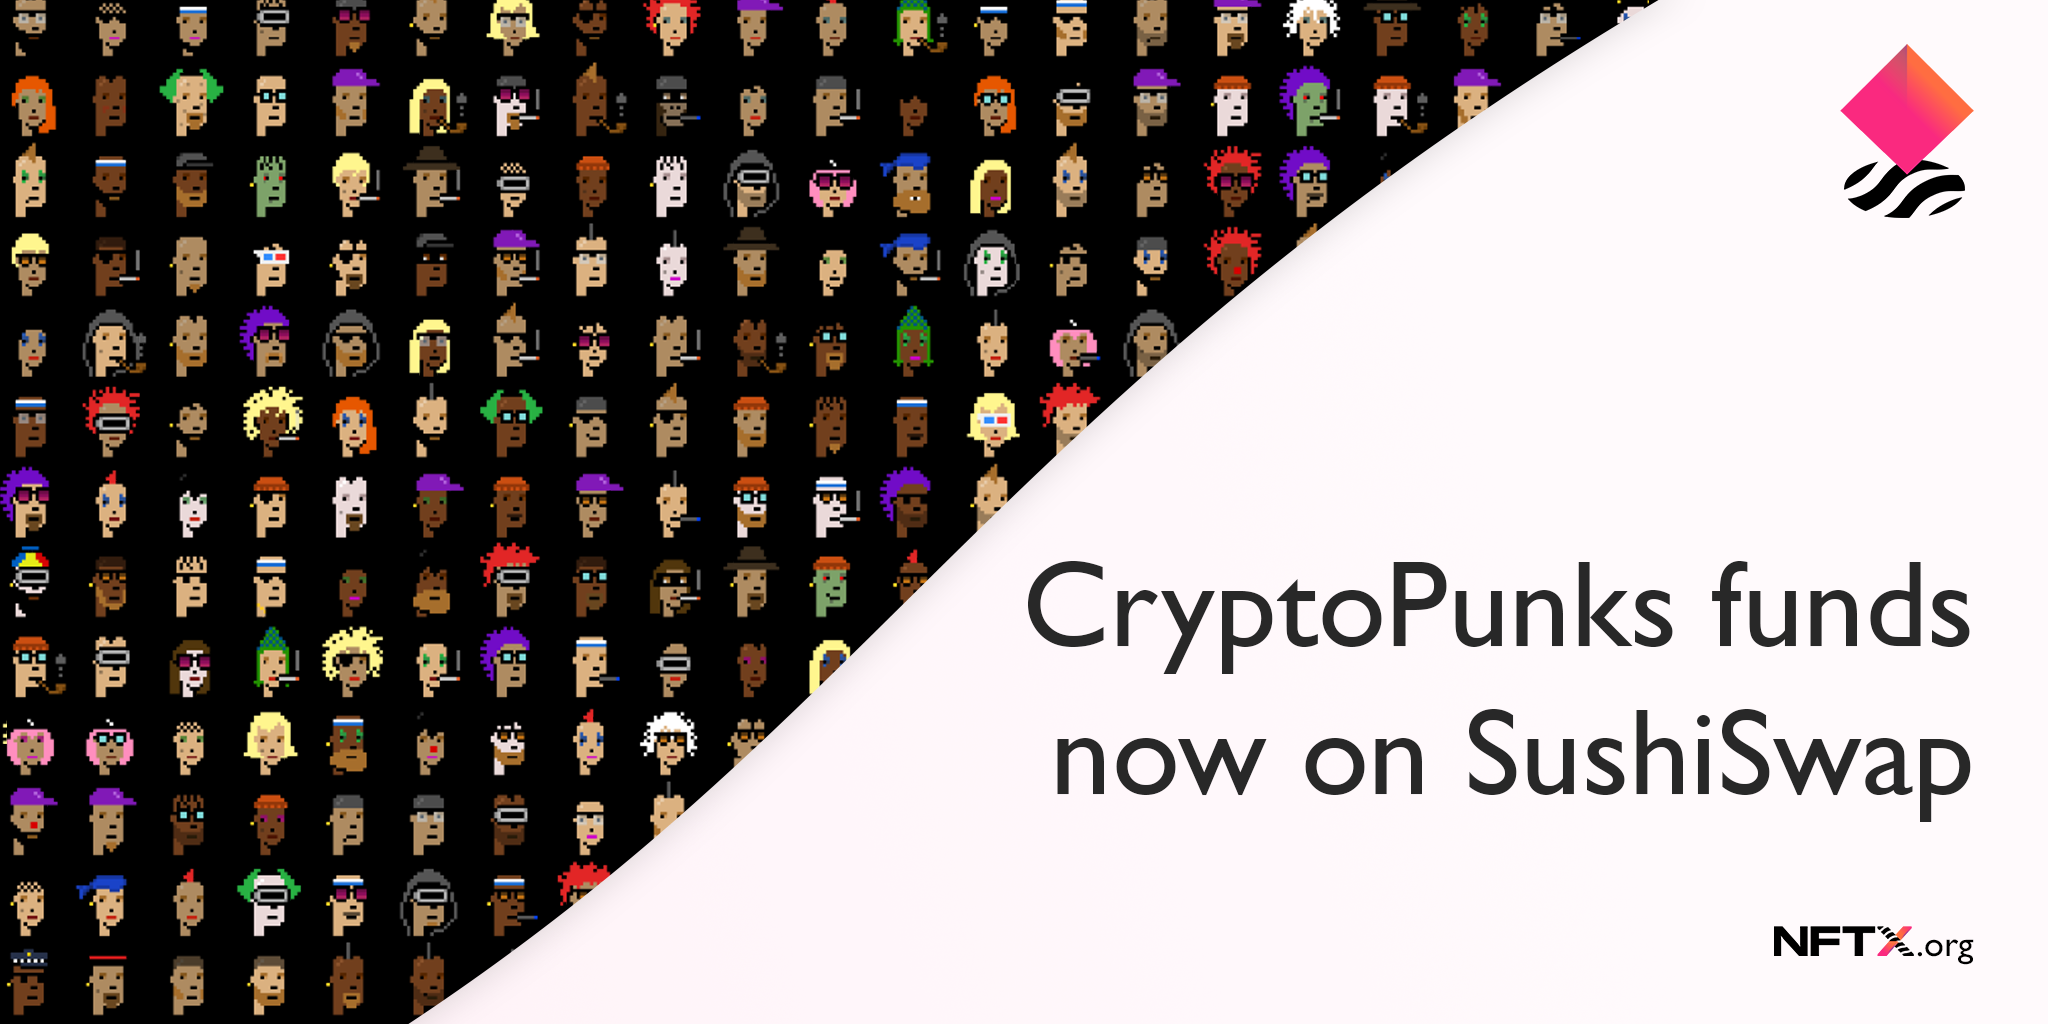 CryptoPunks Single Index funds now also on SushiSwap